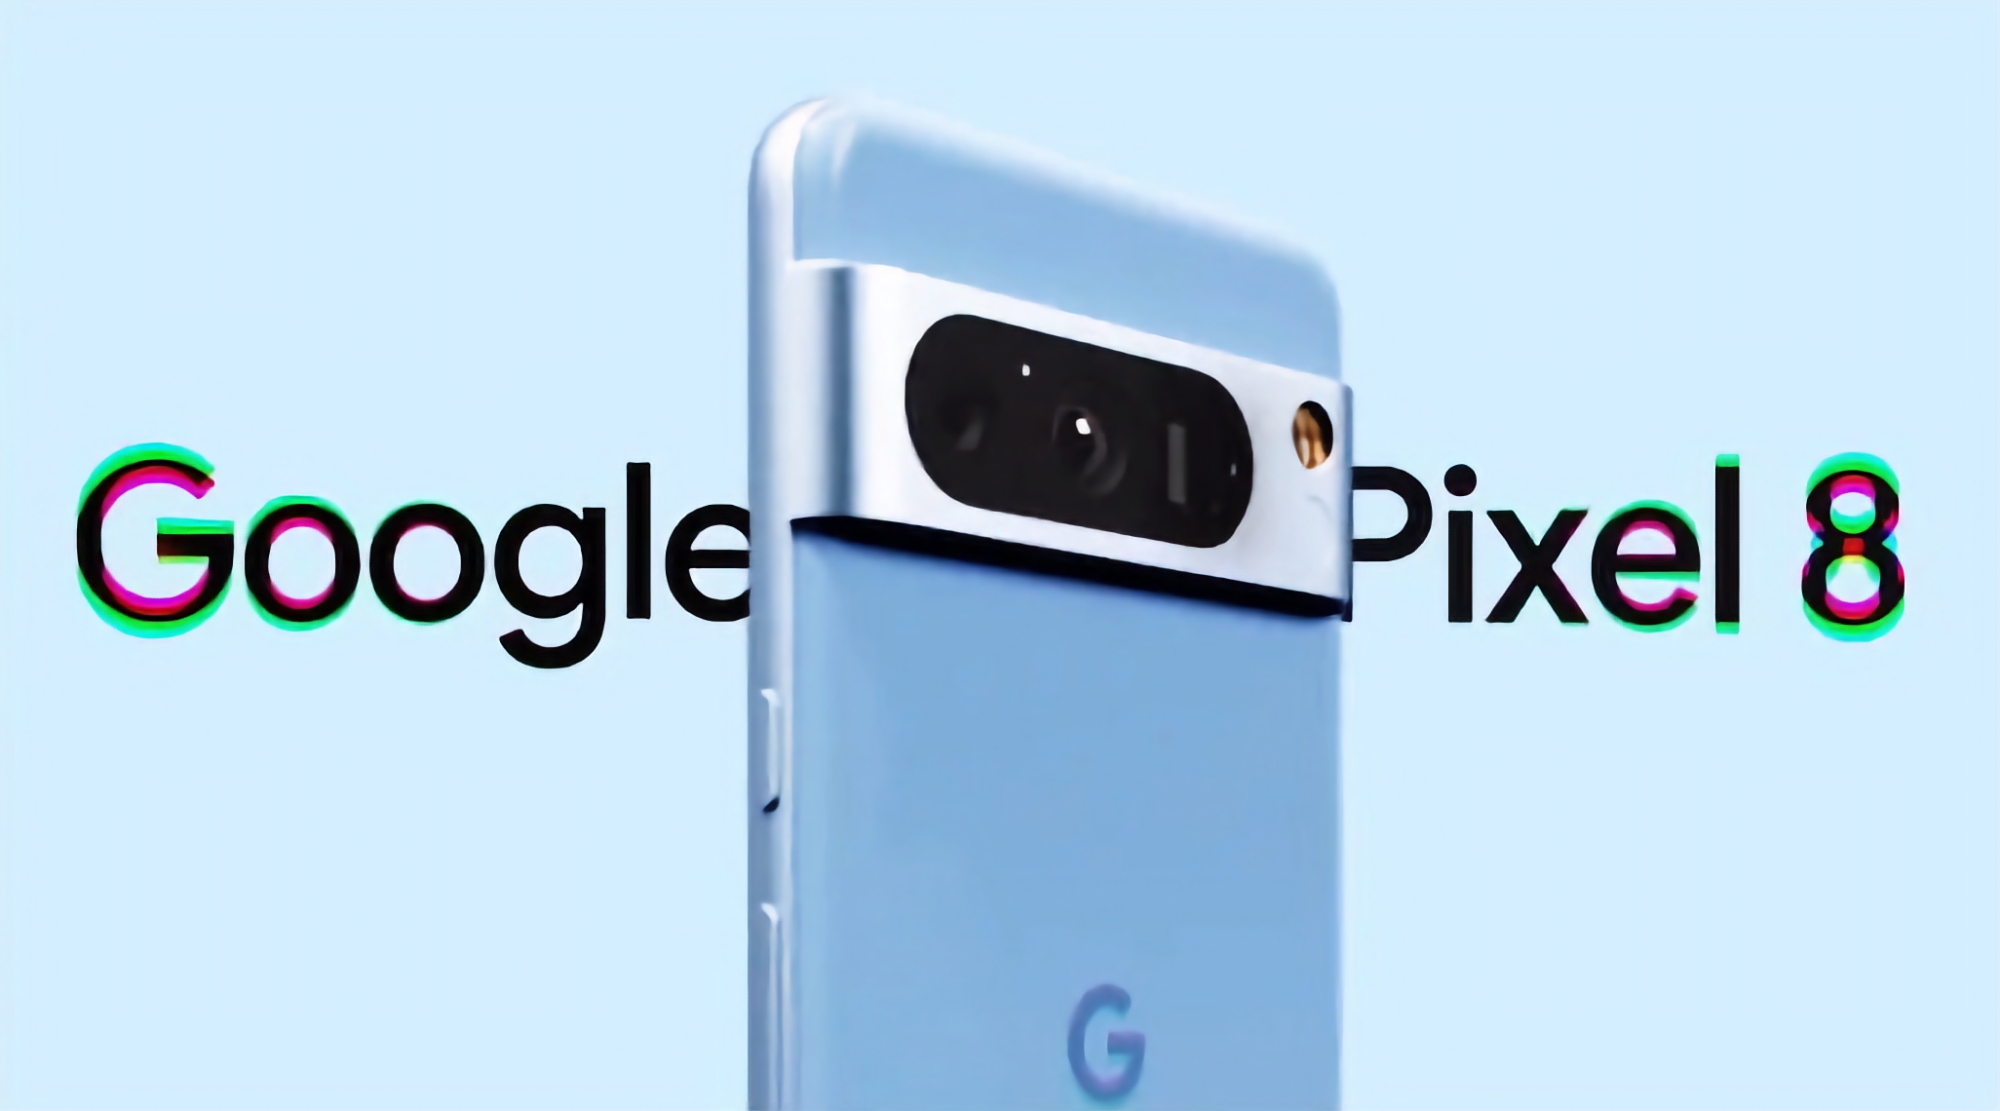 Following Apple: Google has announced a presentation on October 4 to showcase the Pixel 8 smartphones and the Pixel Watch 2 